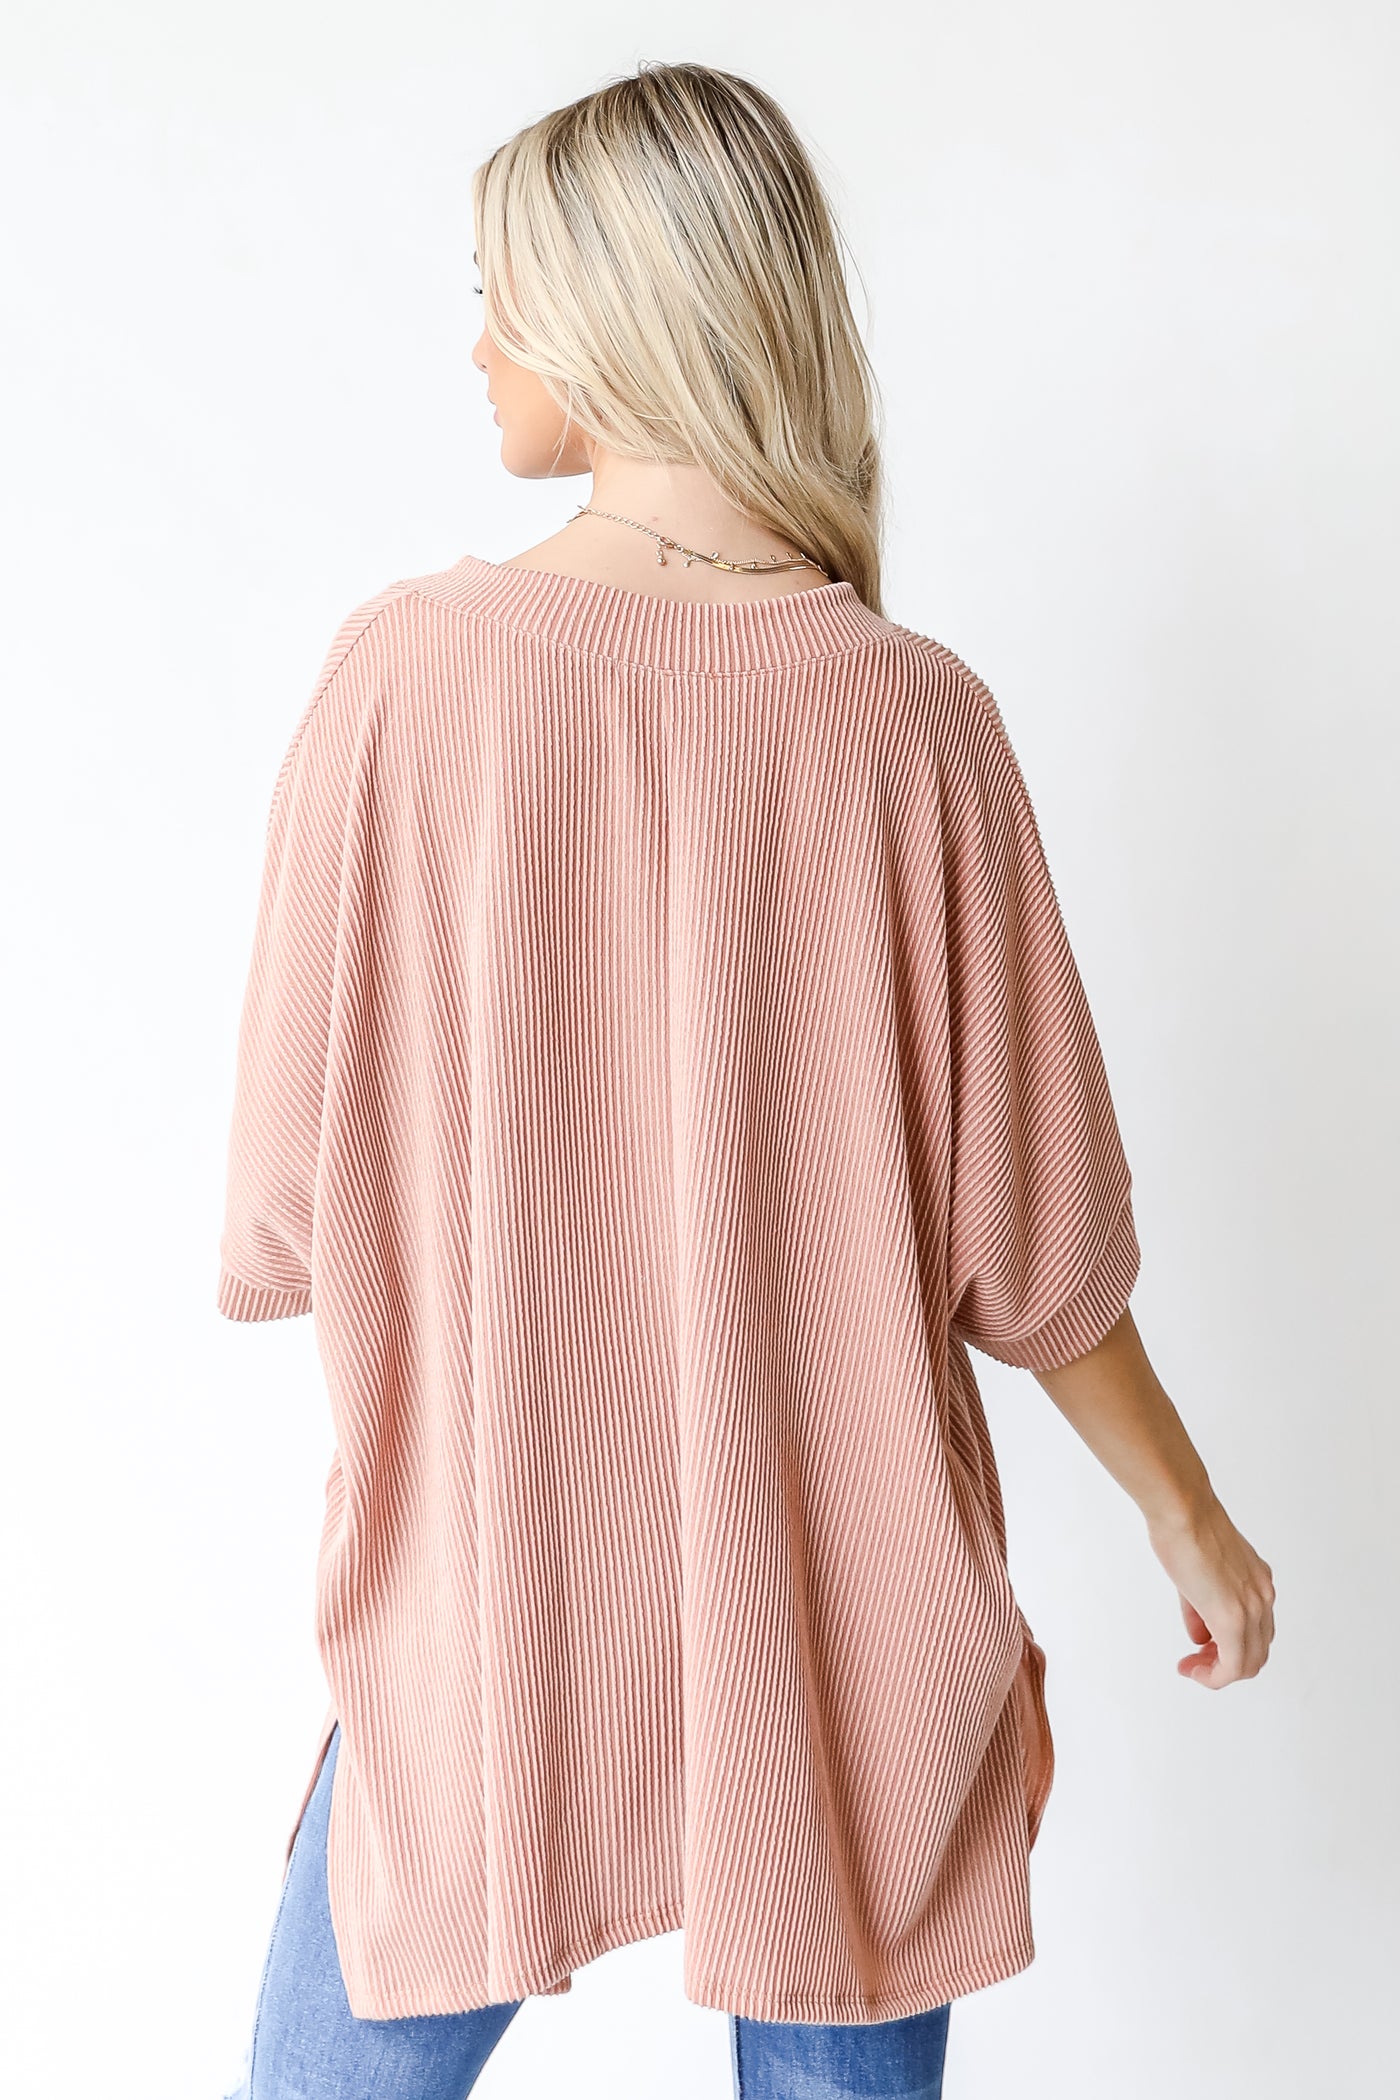 Oversized Corded Top in blush back view